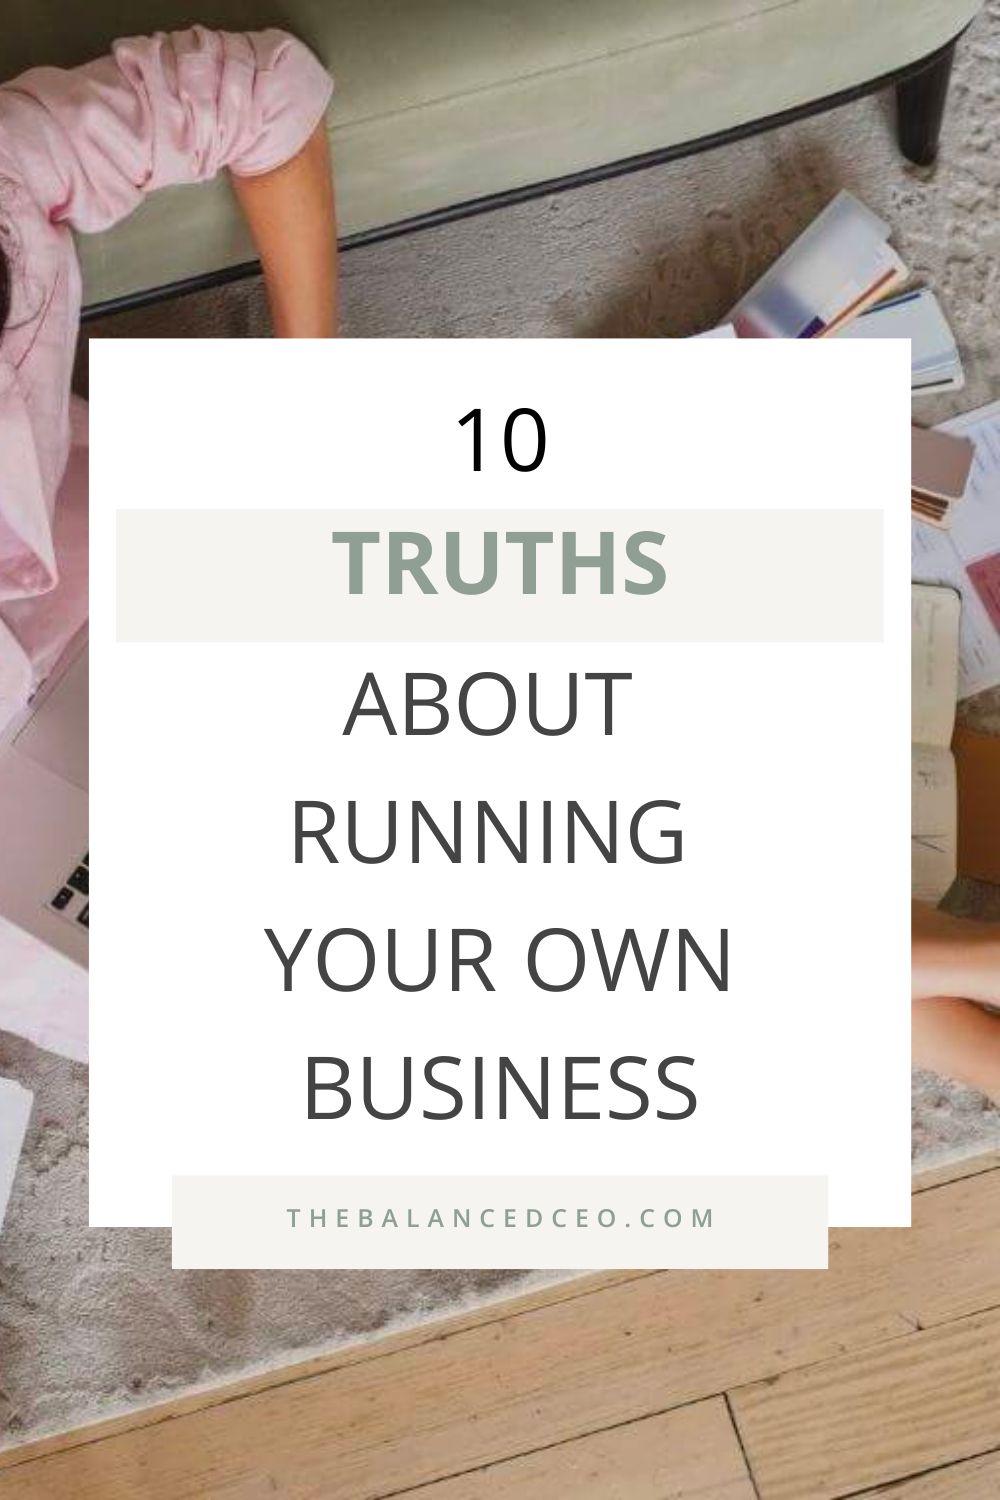 10 Truths About Running Your Own Business